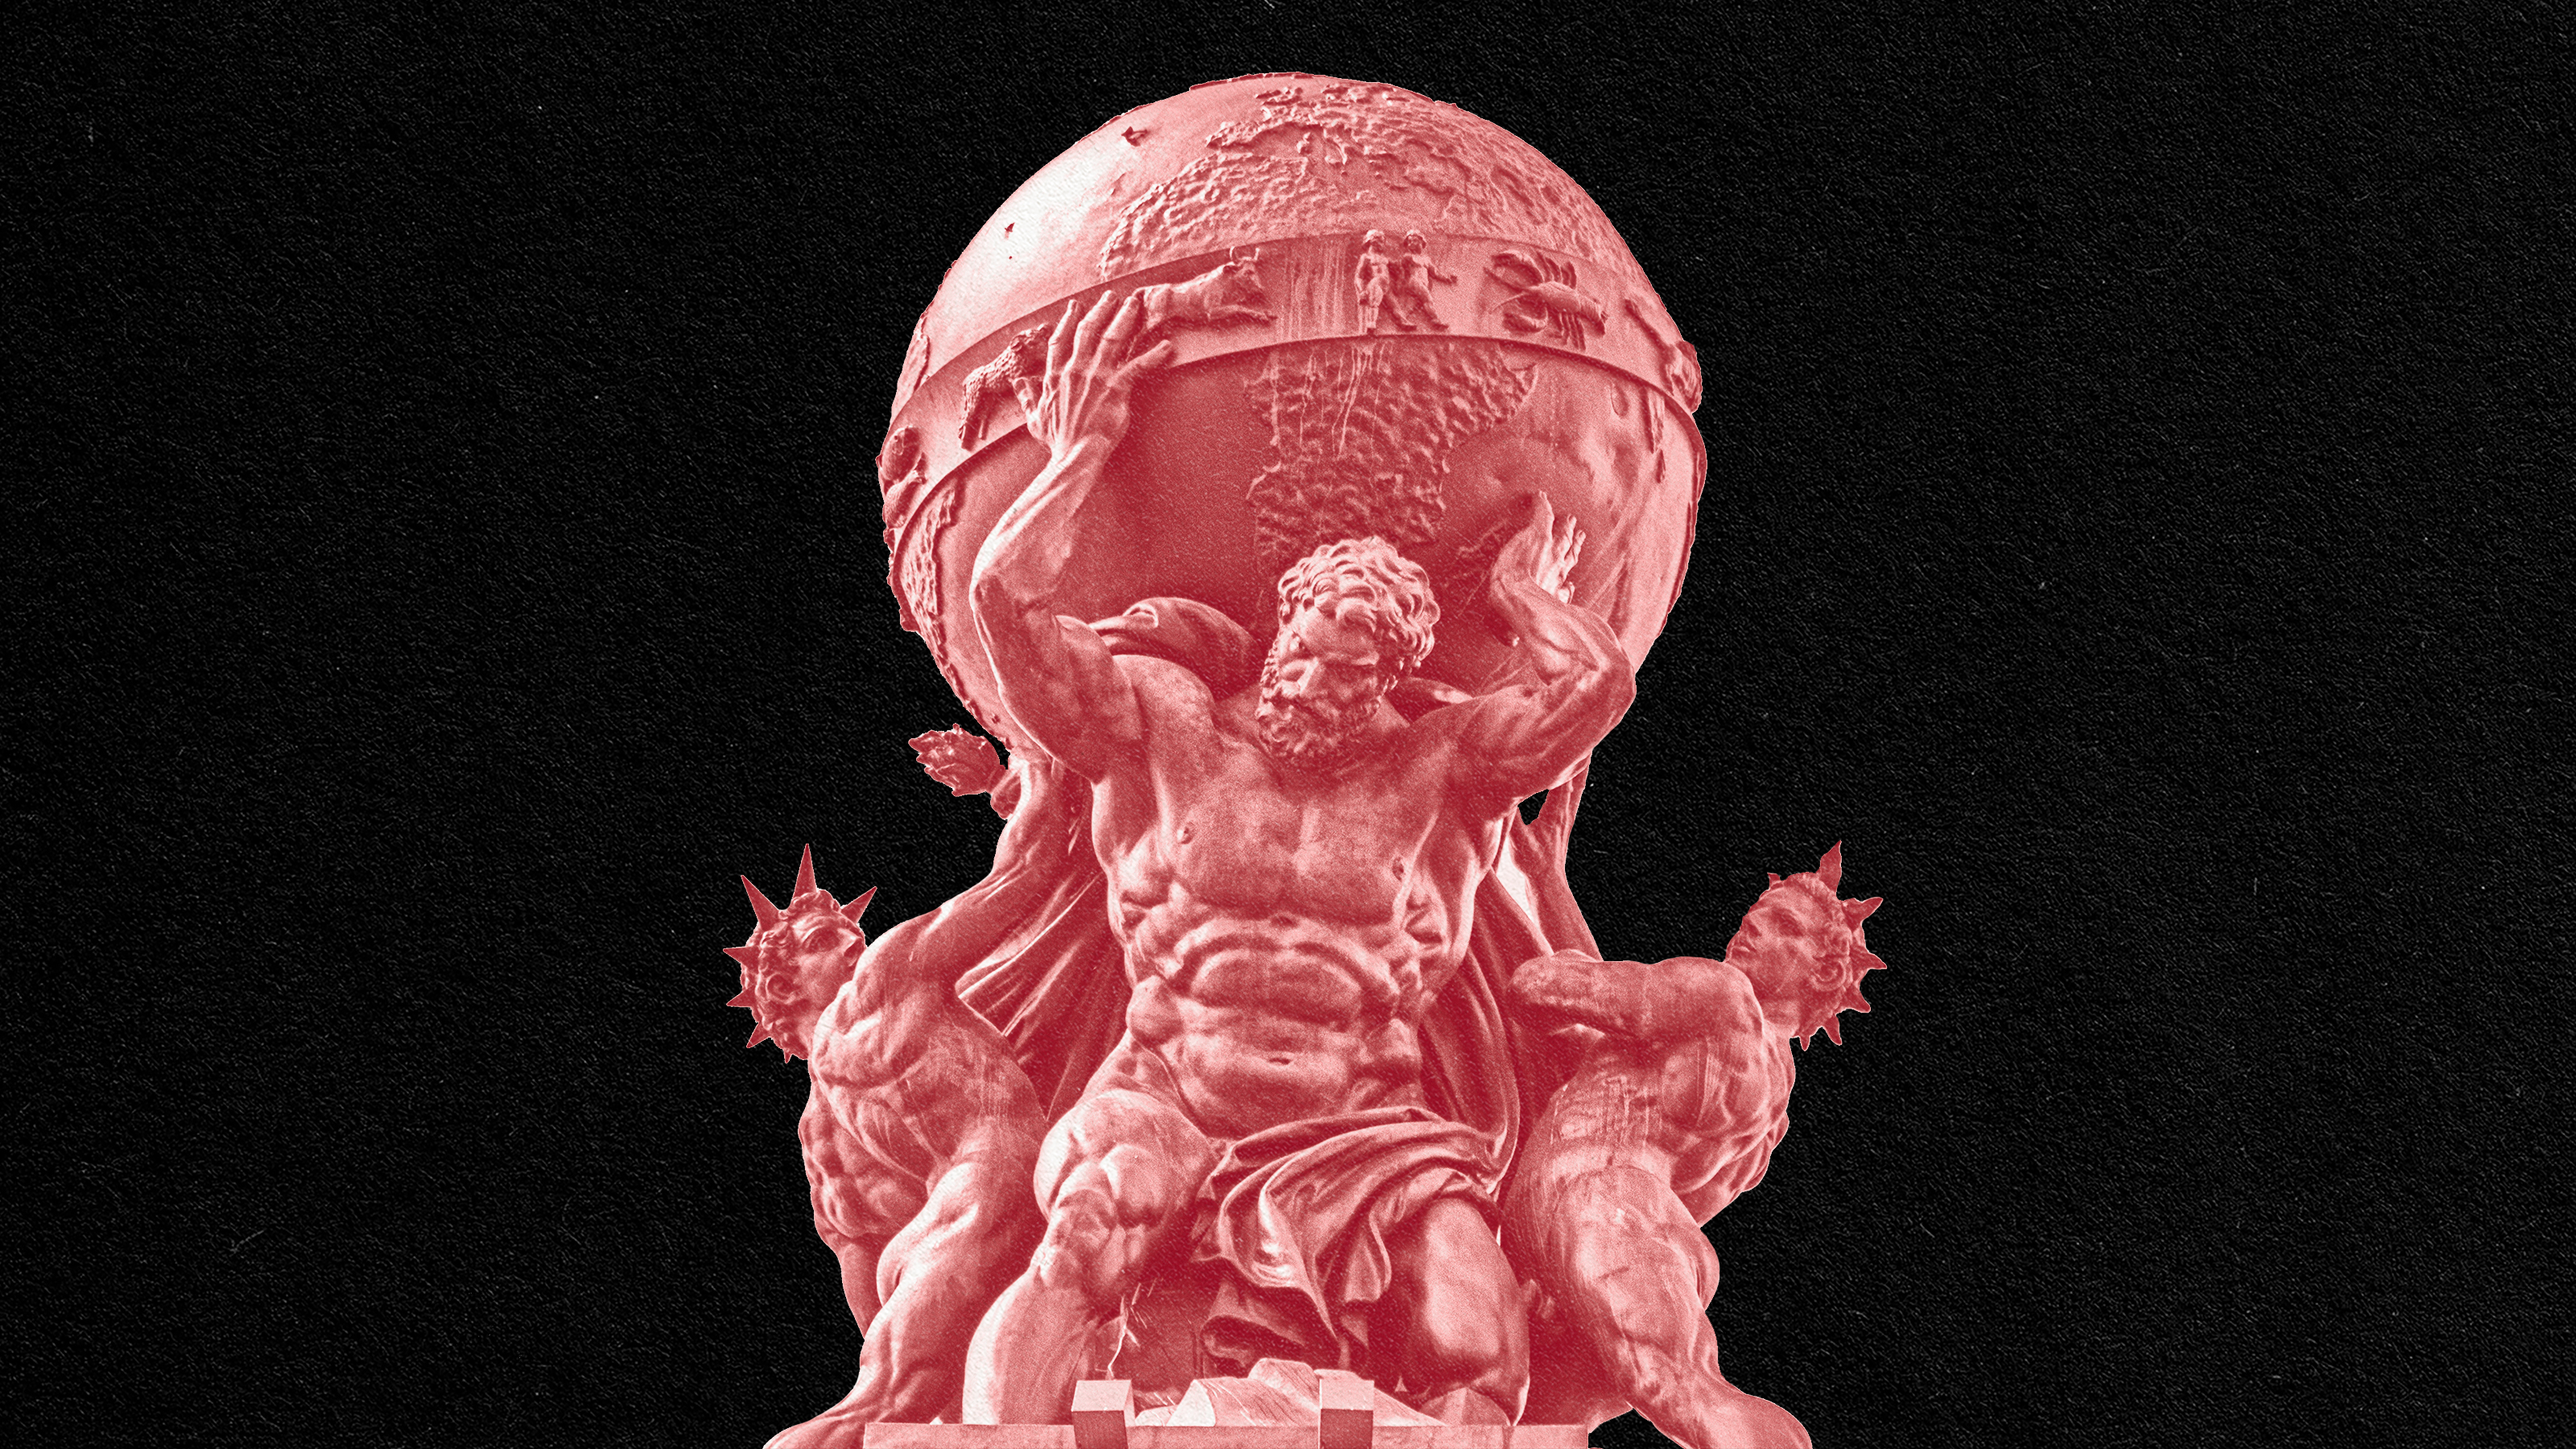 An image of a pain-free red statue on top of a black background.